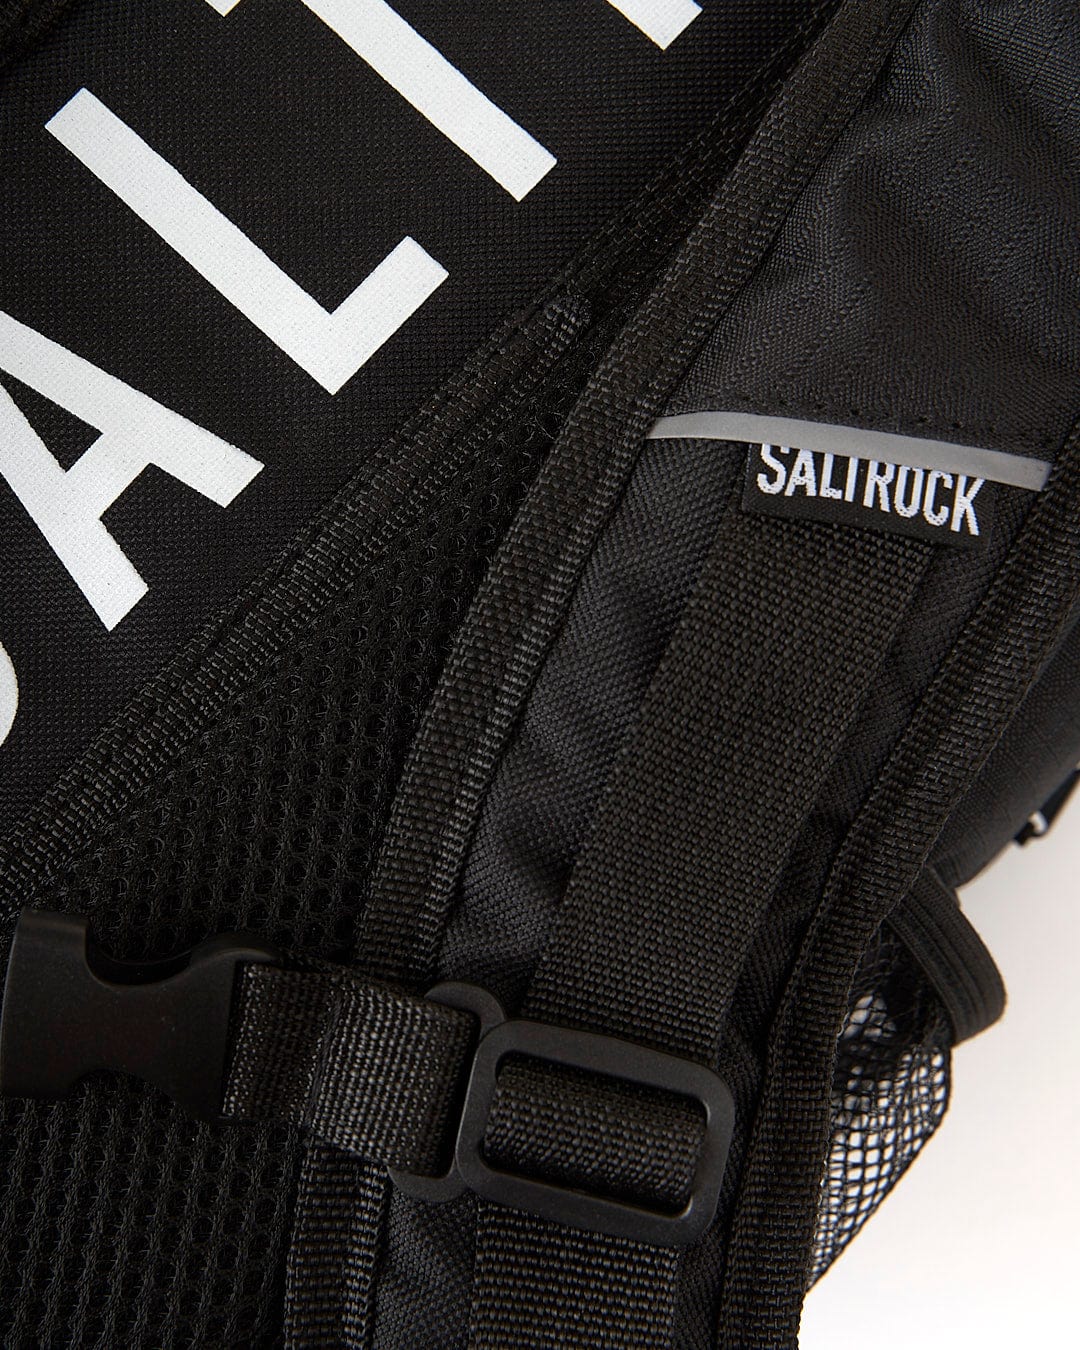 A Cyclone - Urban Backpack - Black with the brand name Saltrock on it.